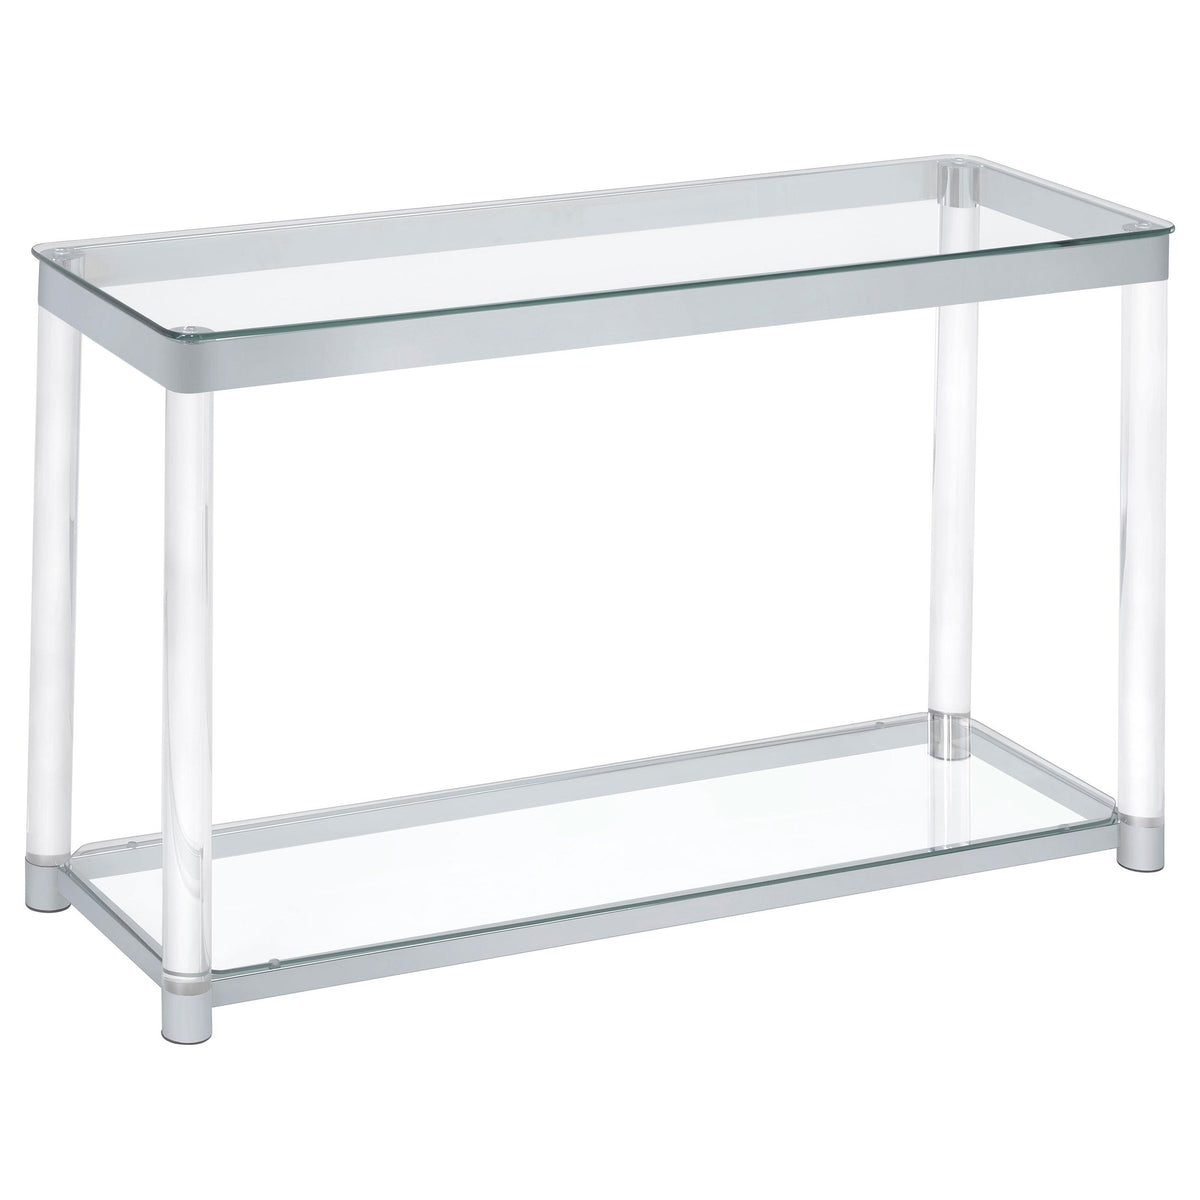 Anne Sofa Table with Lower Shelf Chrome and Clear Anne Sofa Table with Lower Shelf Chrome and Clear Half Price Furniture